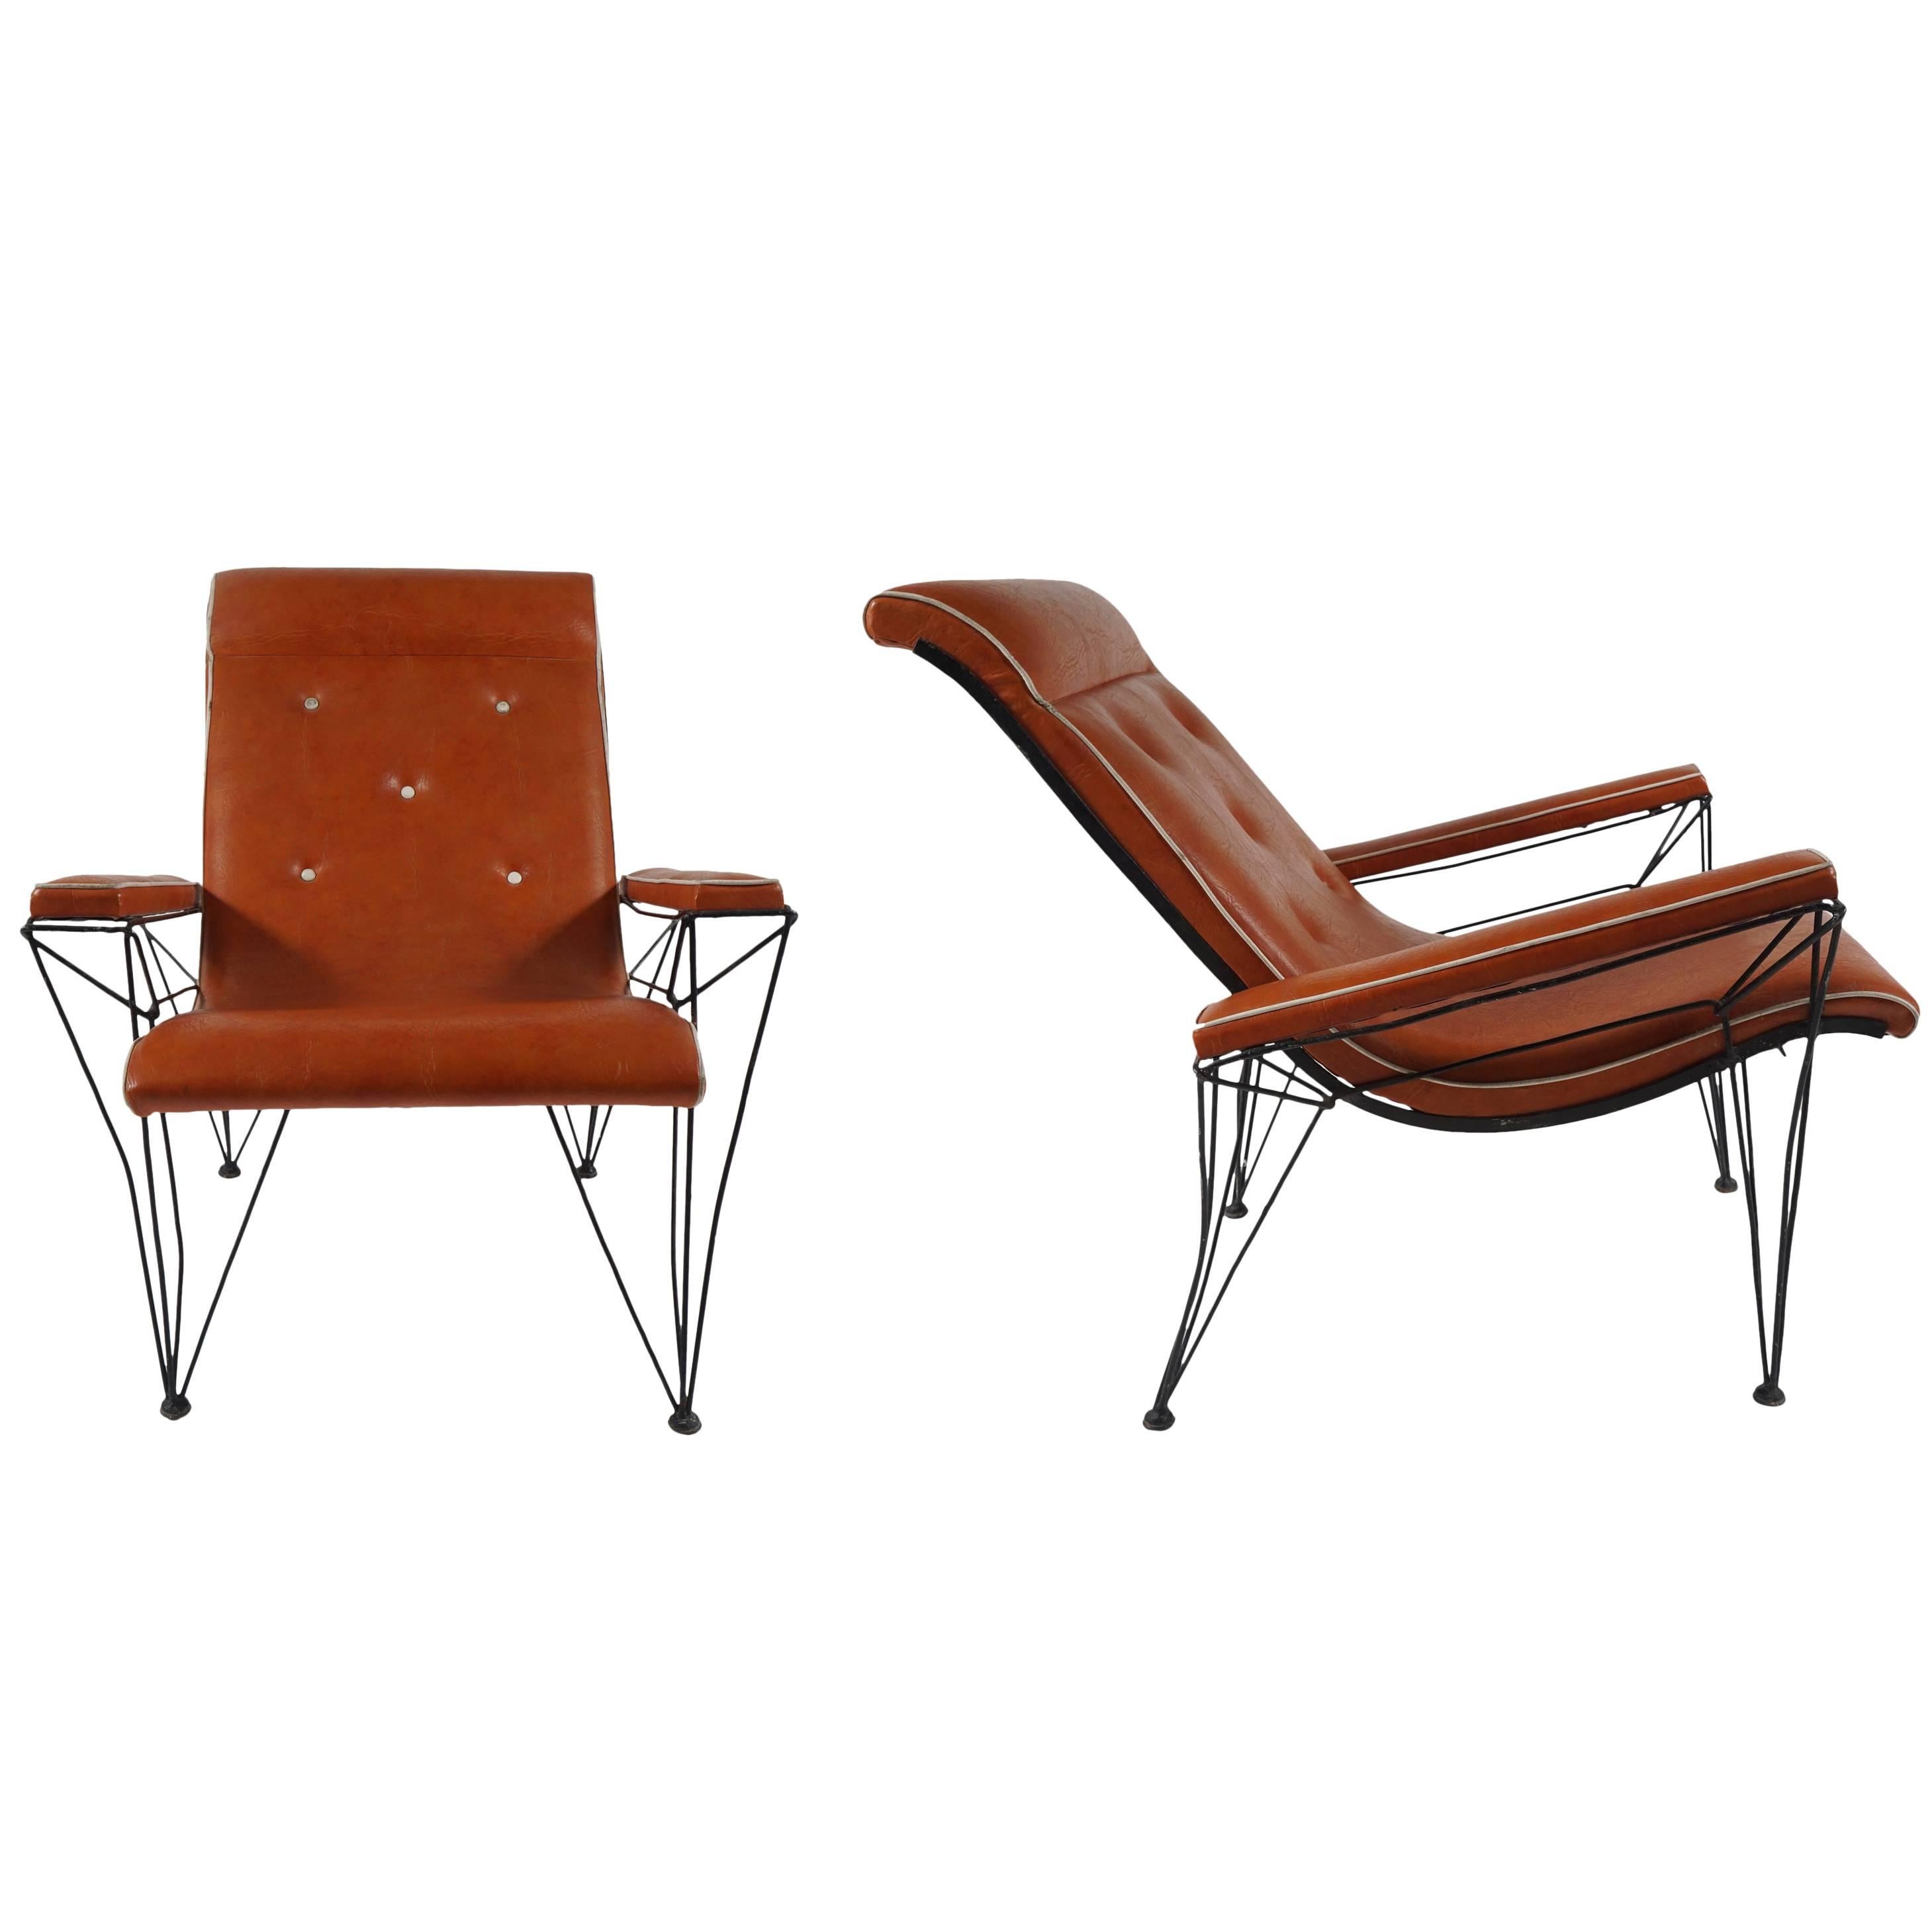 Pair of 1960s Italian Style Lounge Chairs